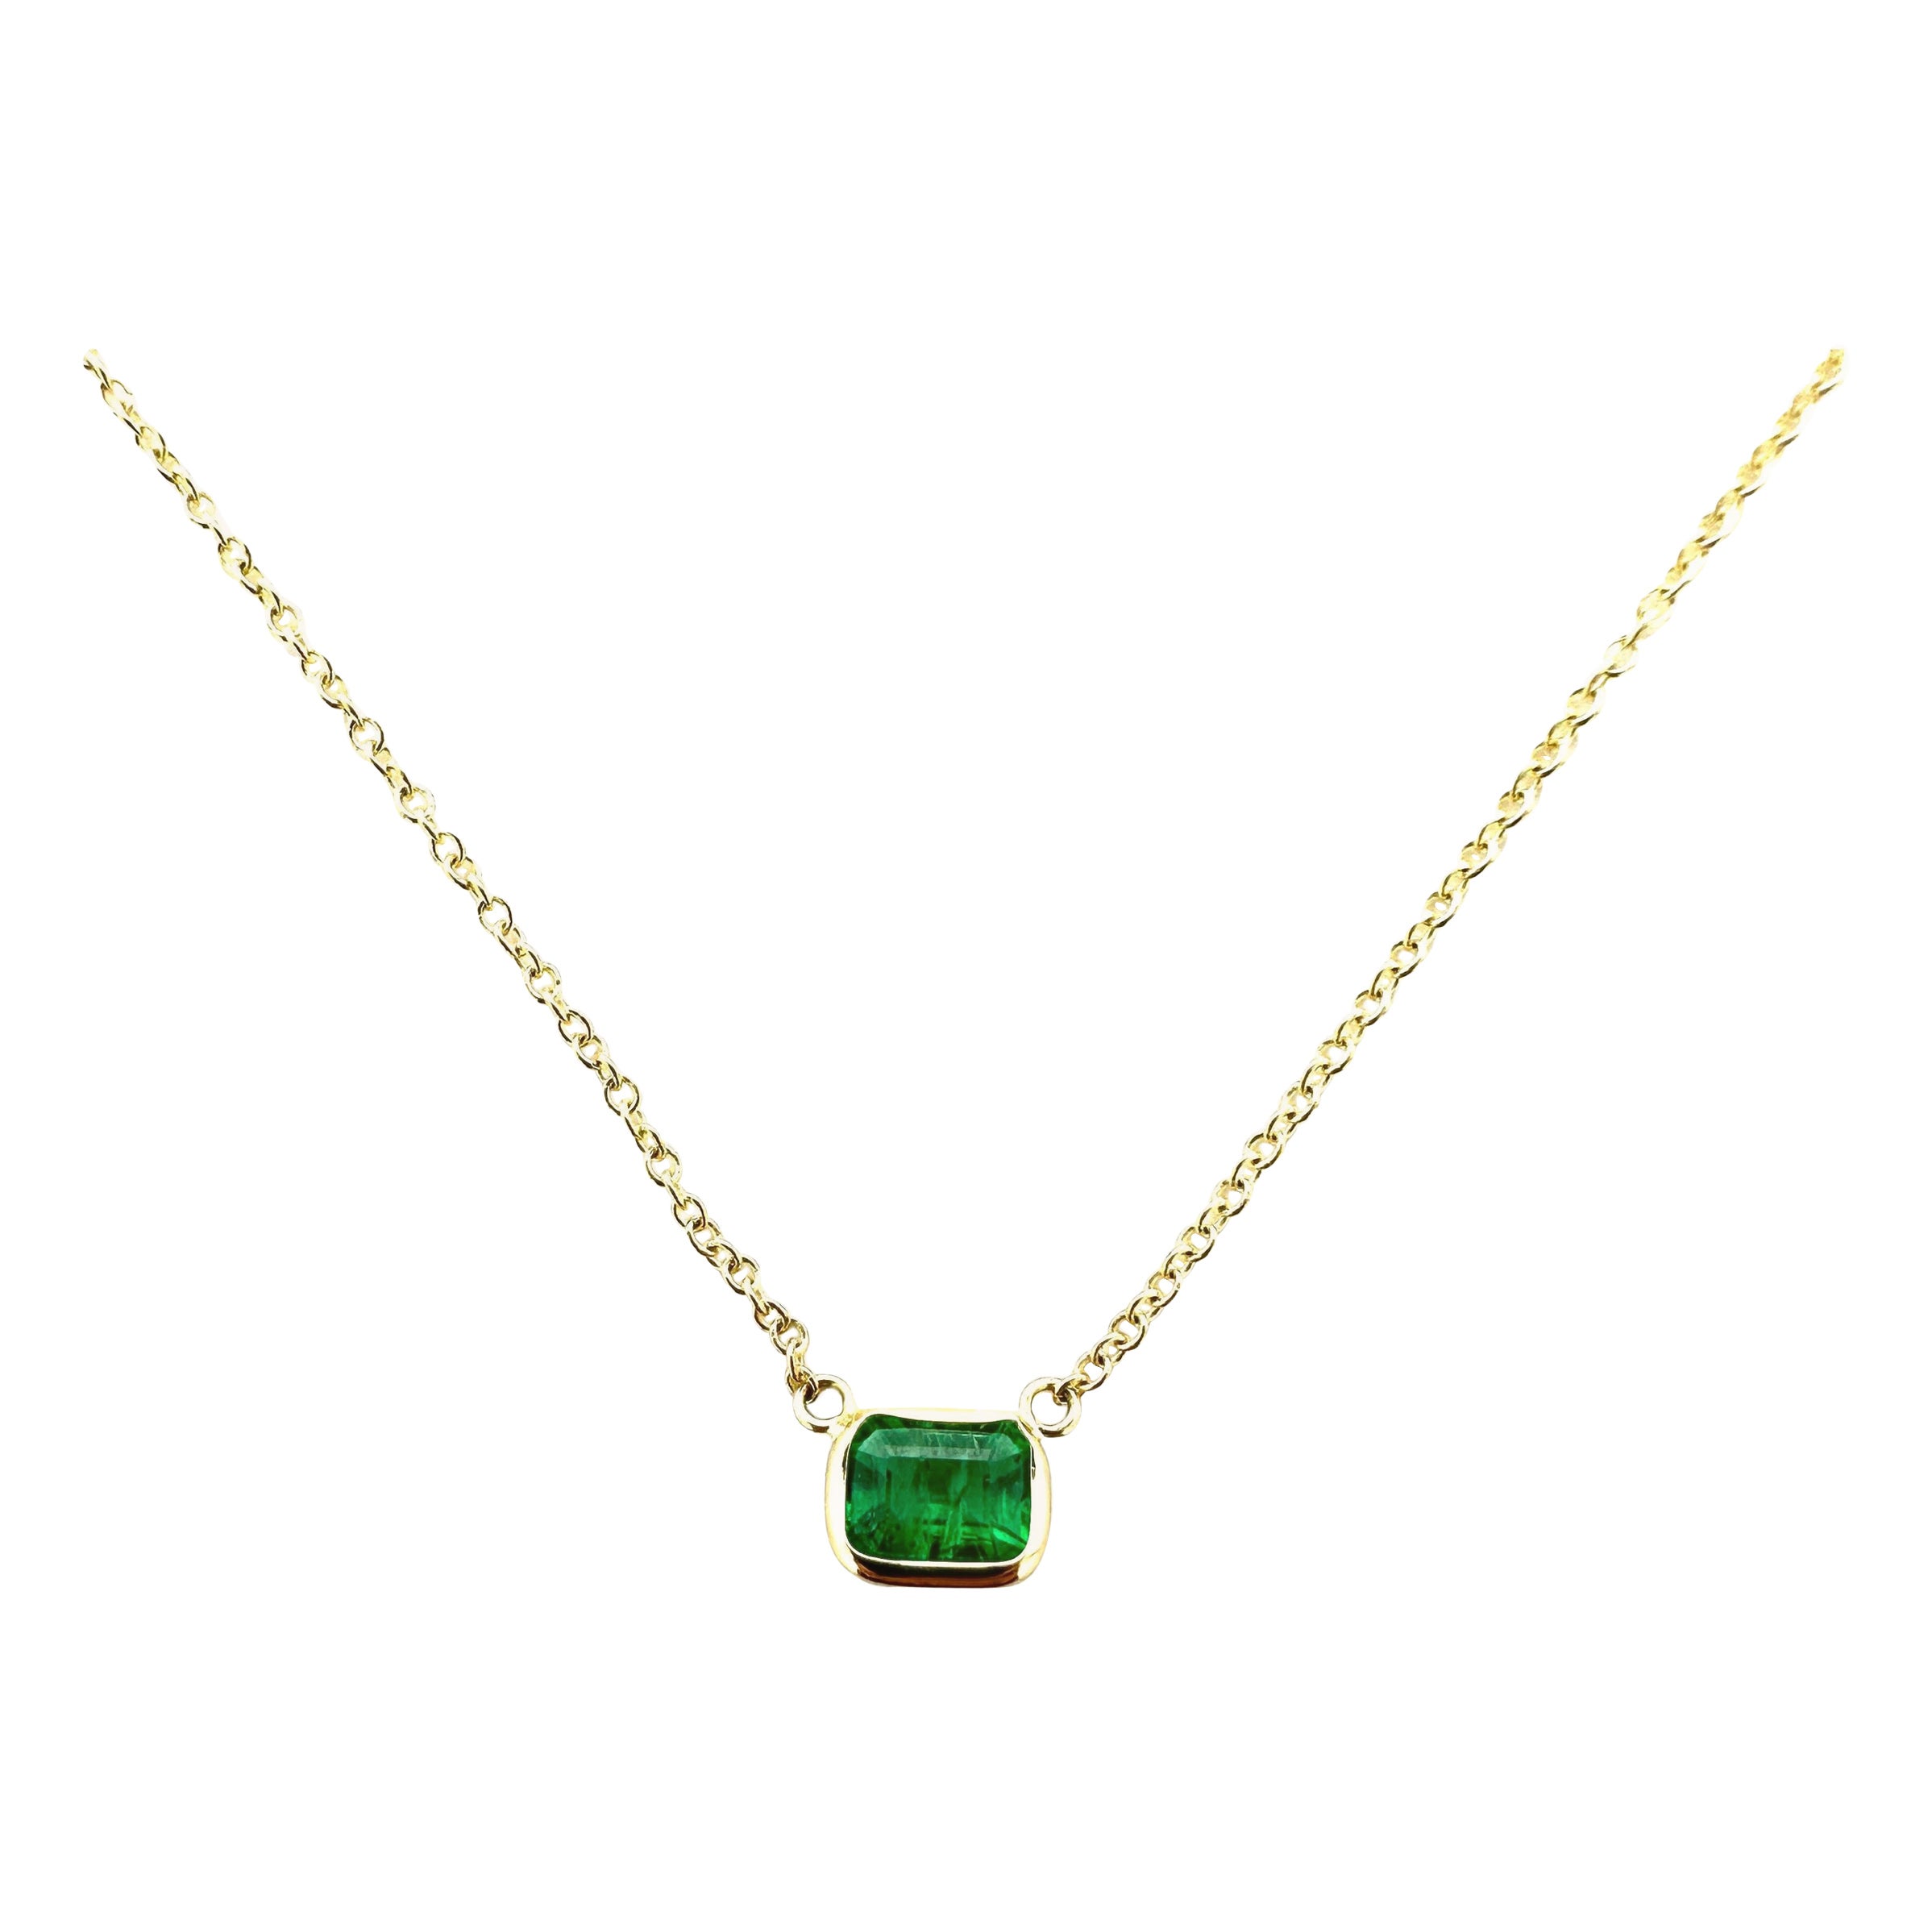 1.41 Carat Long Cushion Green Emerald & Fashion Necklaces In 14K Yellow Gold